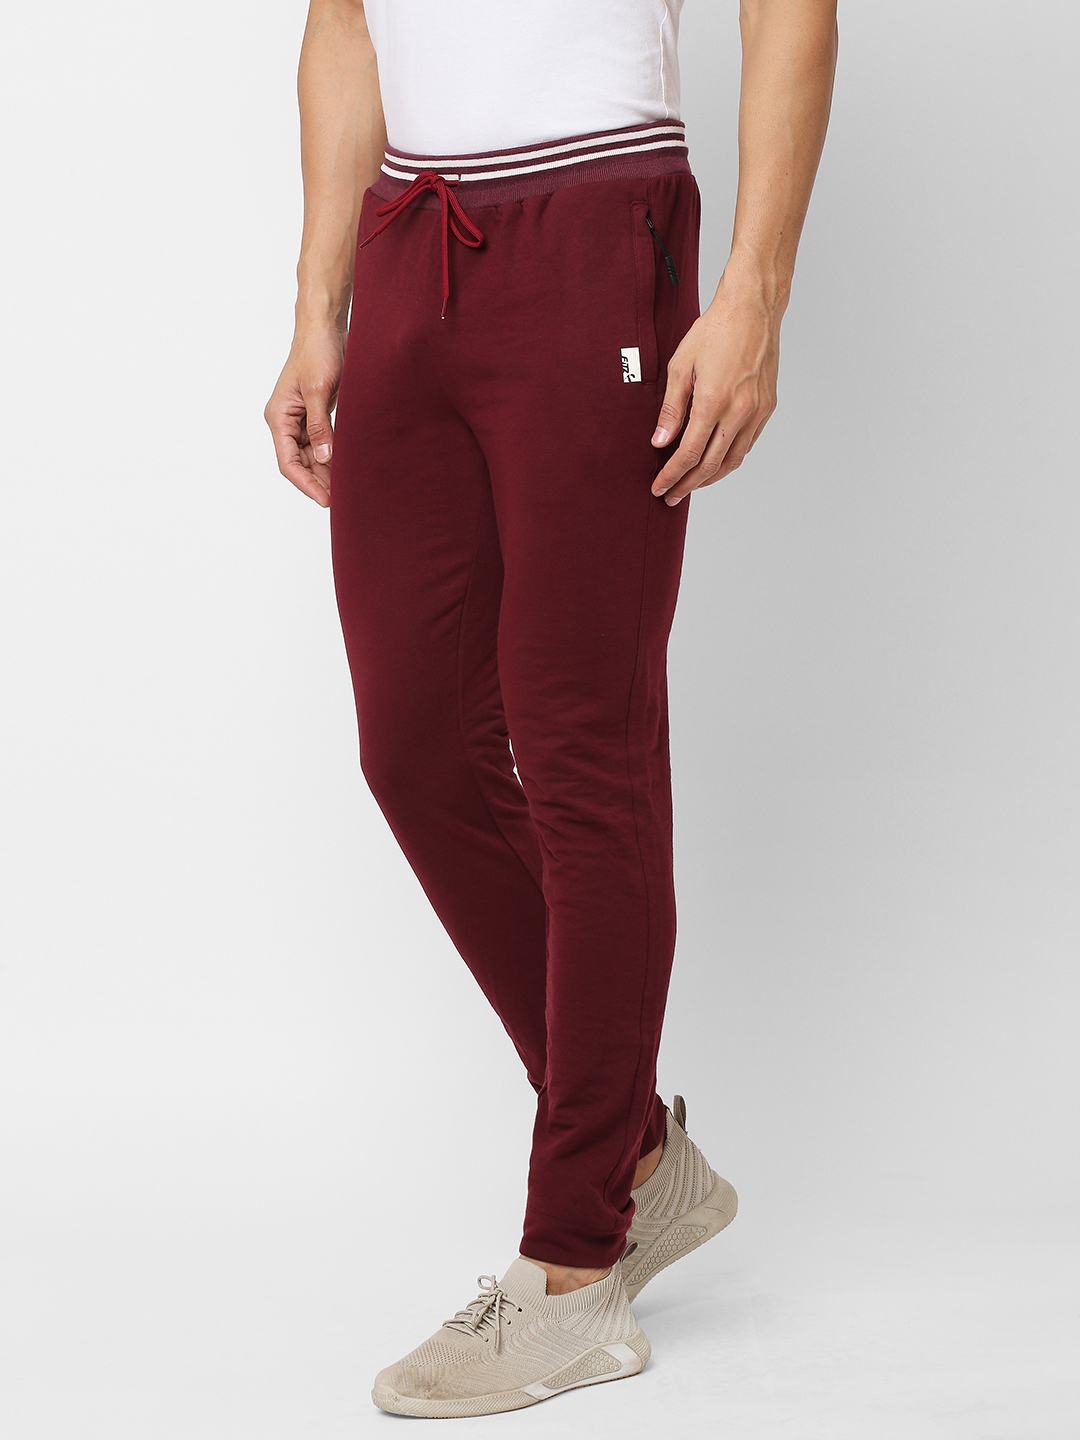 Men's Slim Fit Red Cotton Blend Casual Joogers